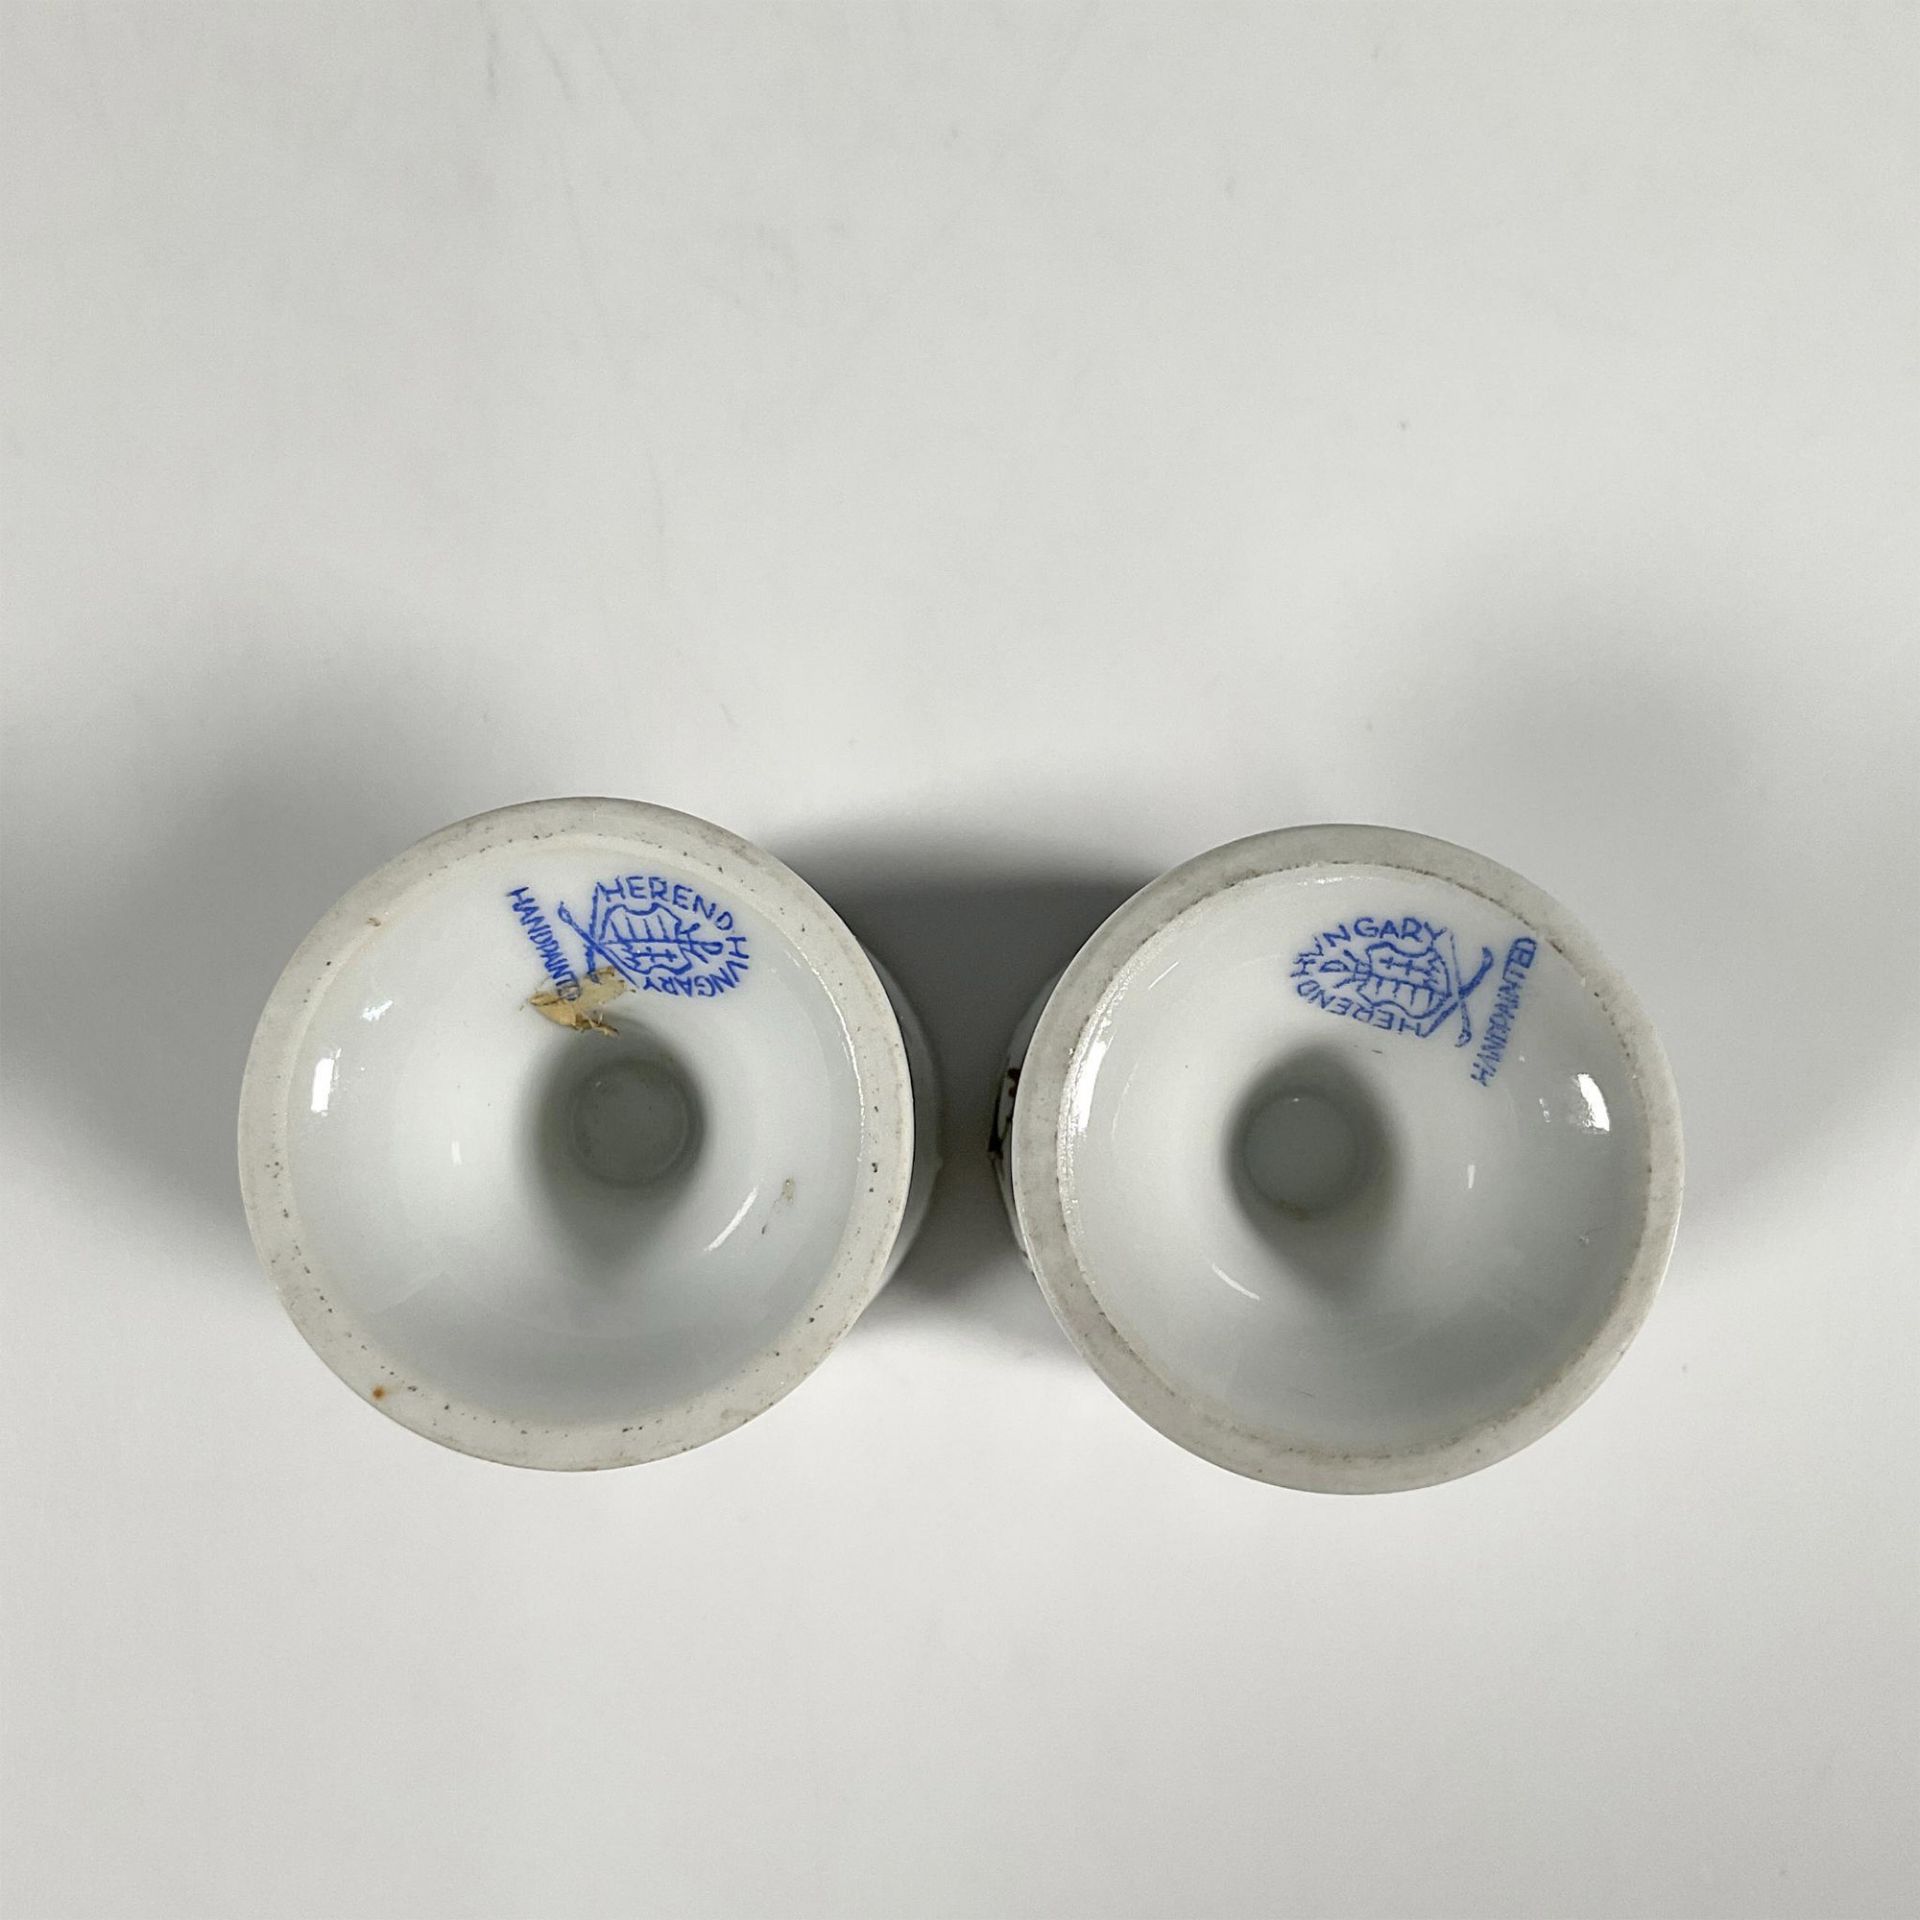 Pair of Herend Porcelain Egg Cups with Bird Motif - Image 3 of 3